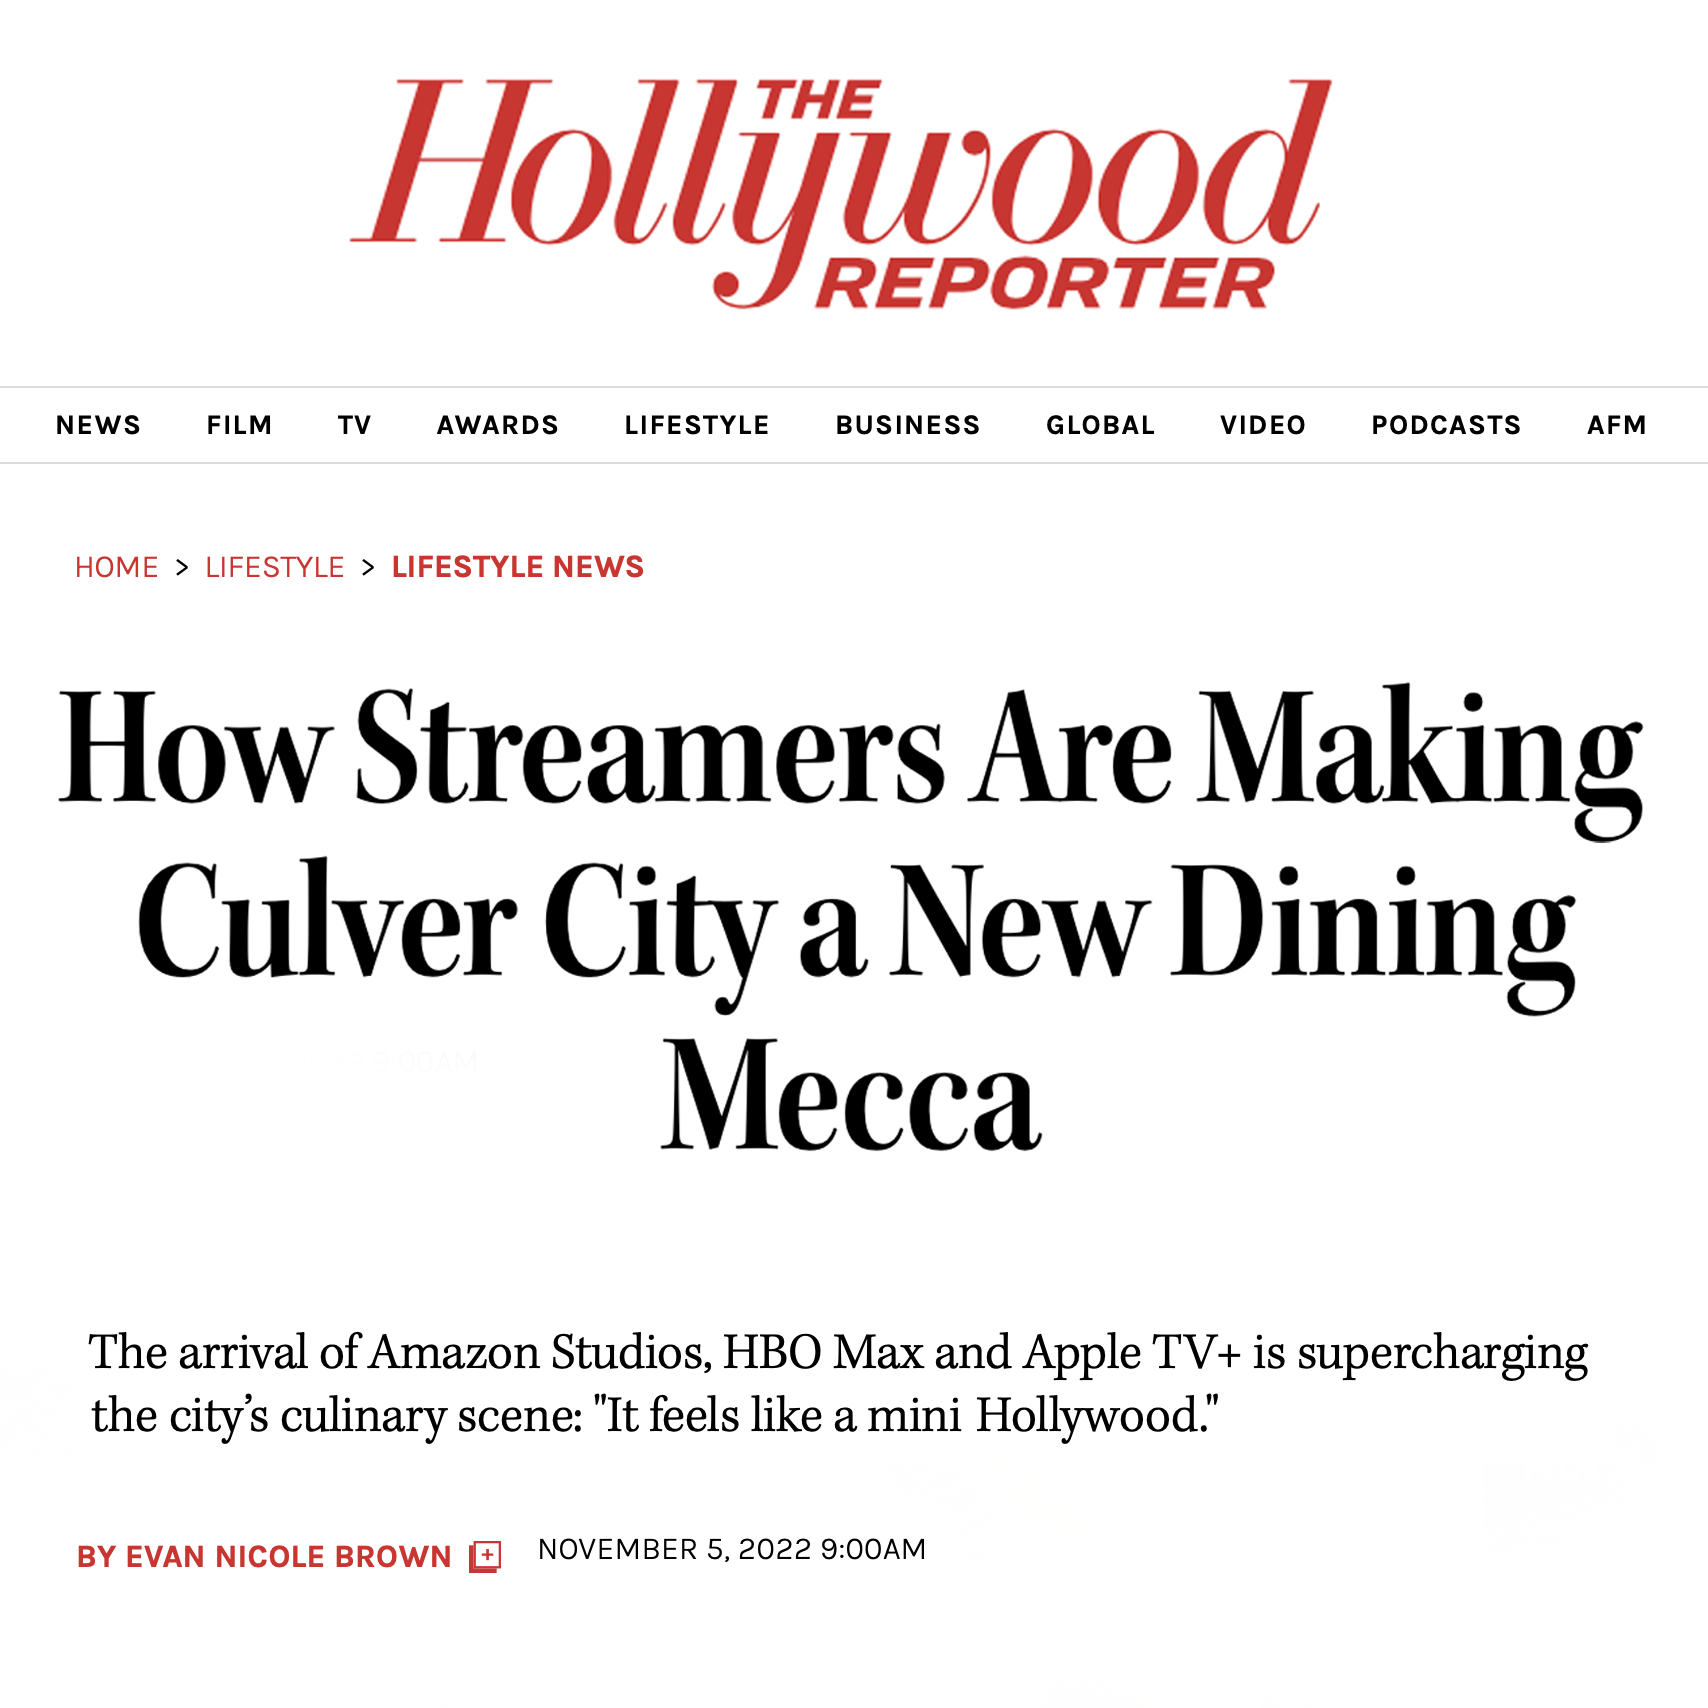 How Streamers are Making Culver City a New Dining Mecca